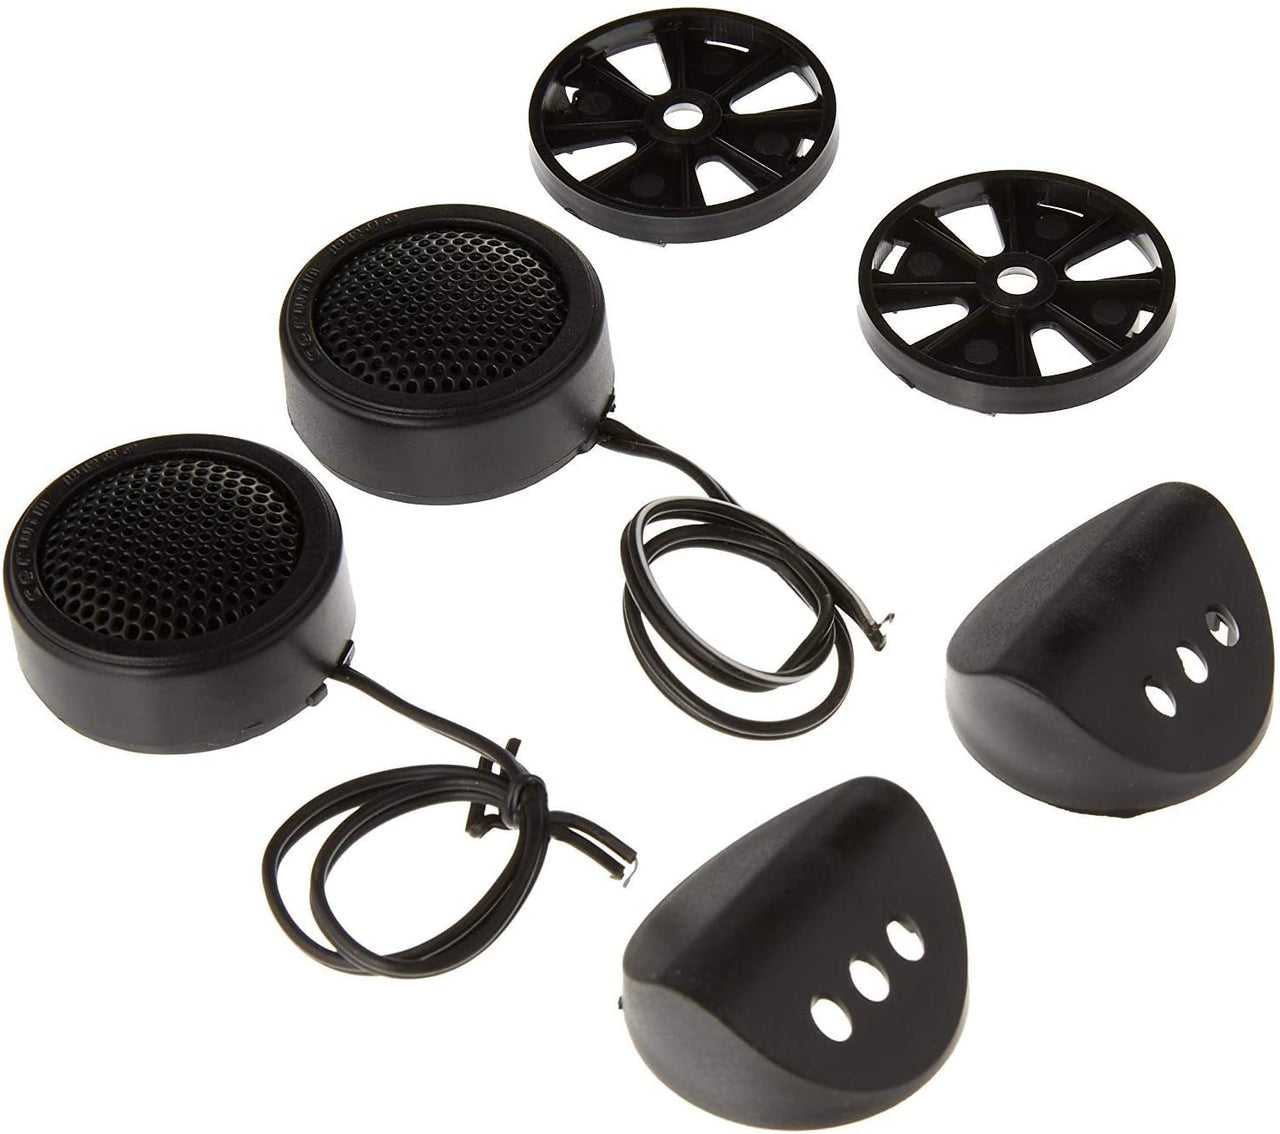 Absolute TW400 High-Performance Piezo Tweeters for Car Audio 1.5" 400 Watts 4 ohm Super High Frequency